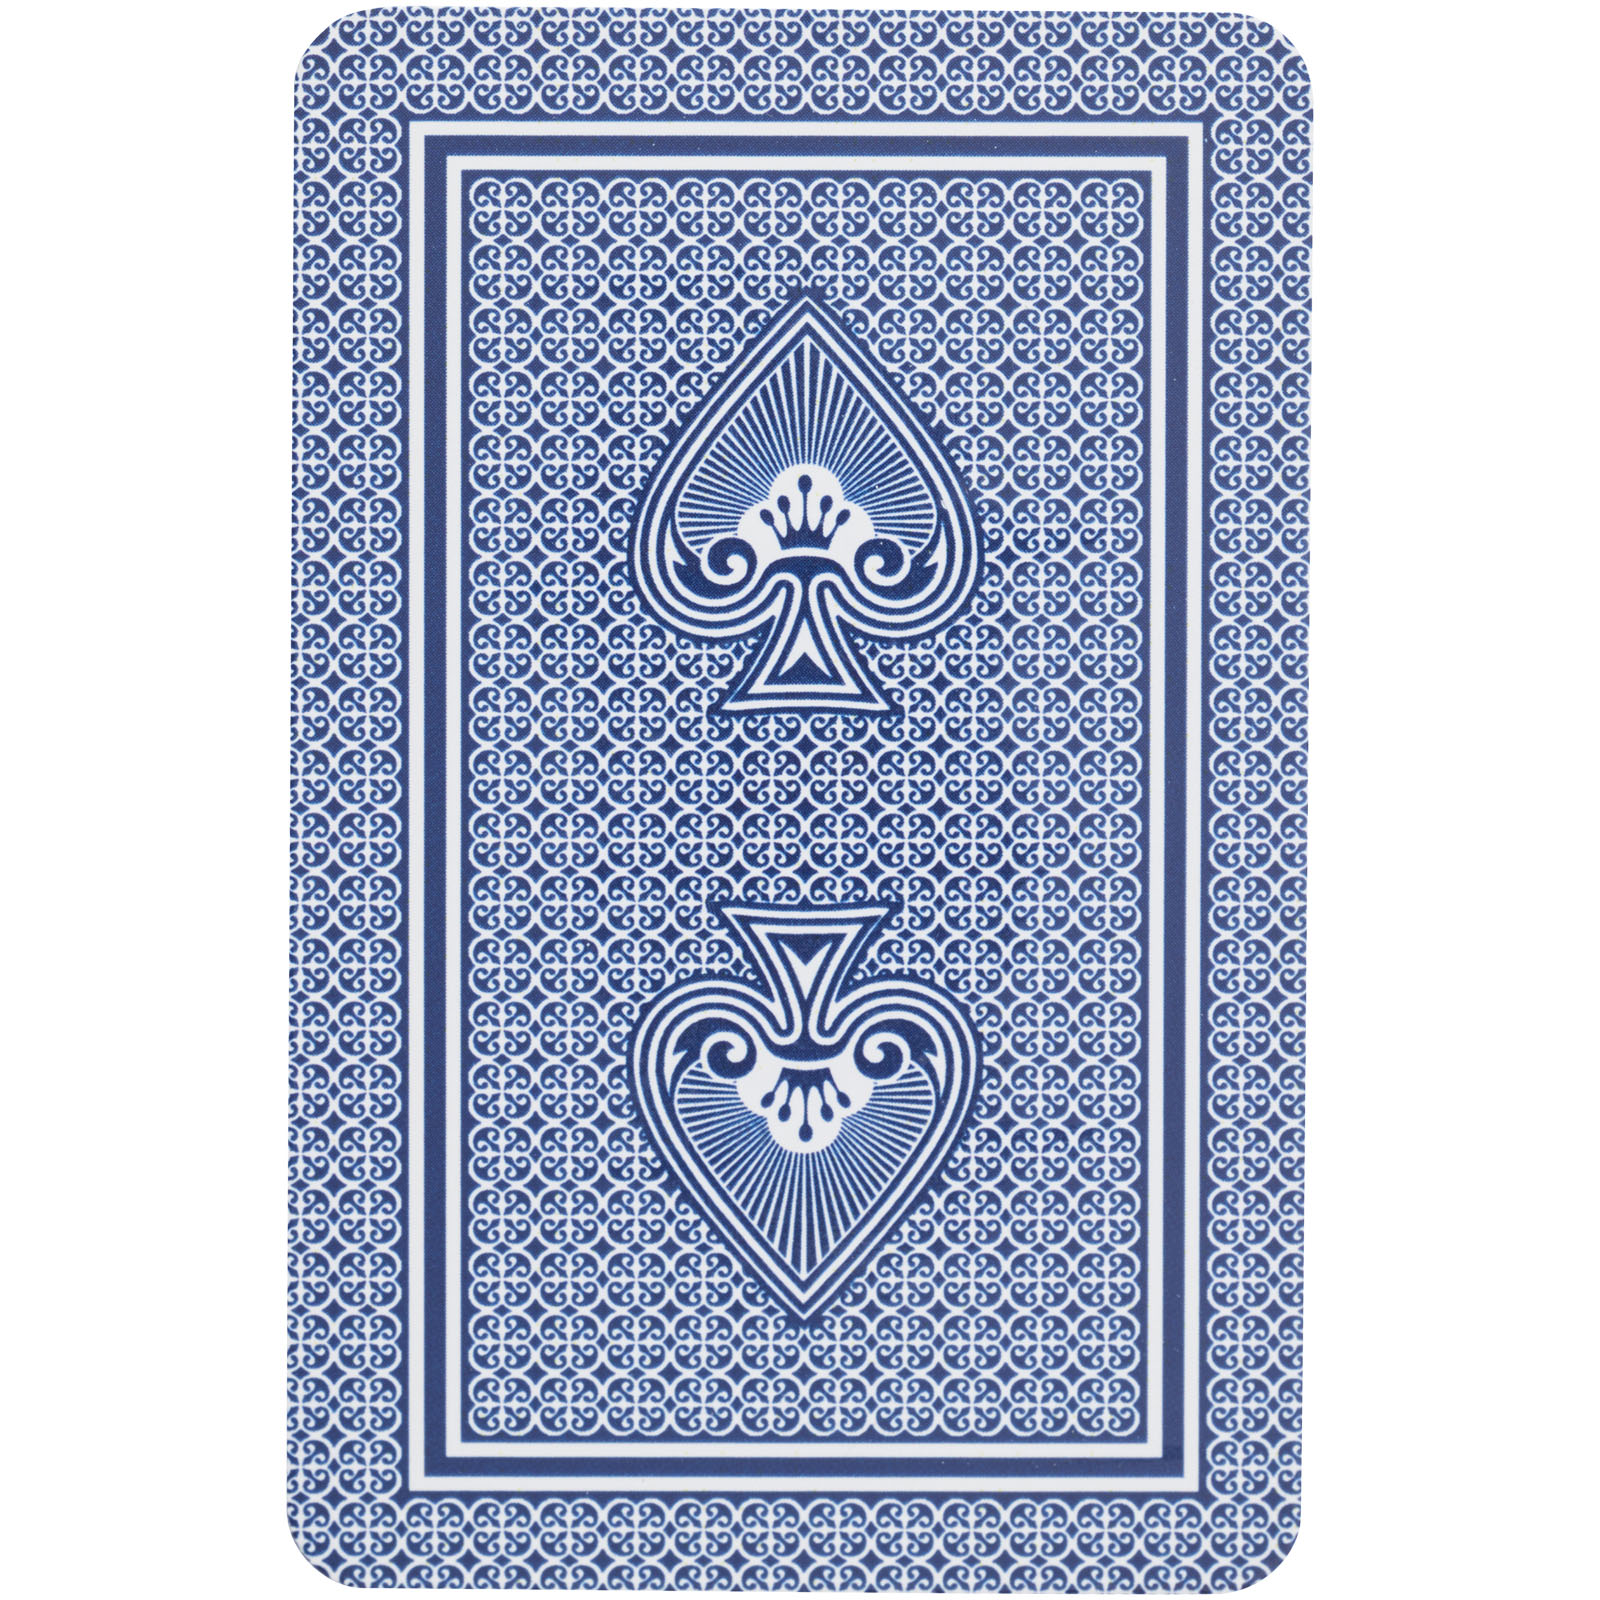 Advertising Indoor Games - Ace playing card set - 2